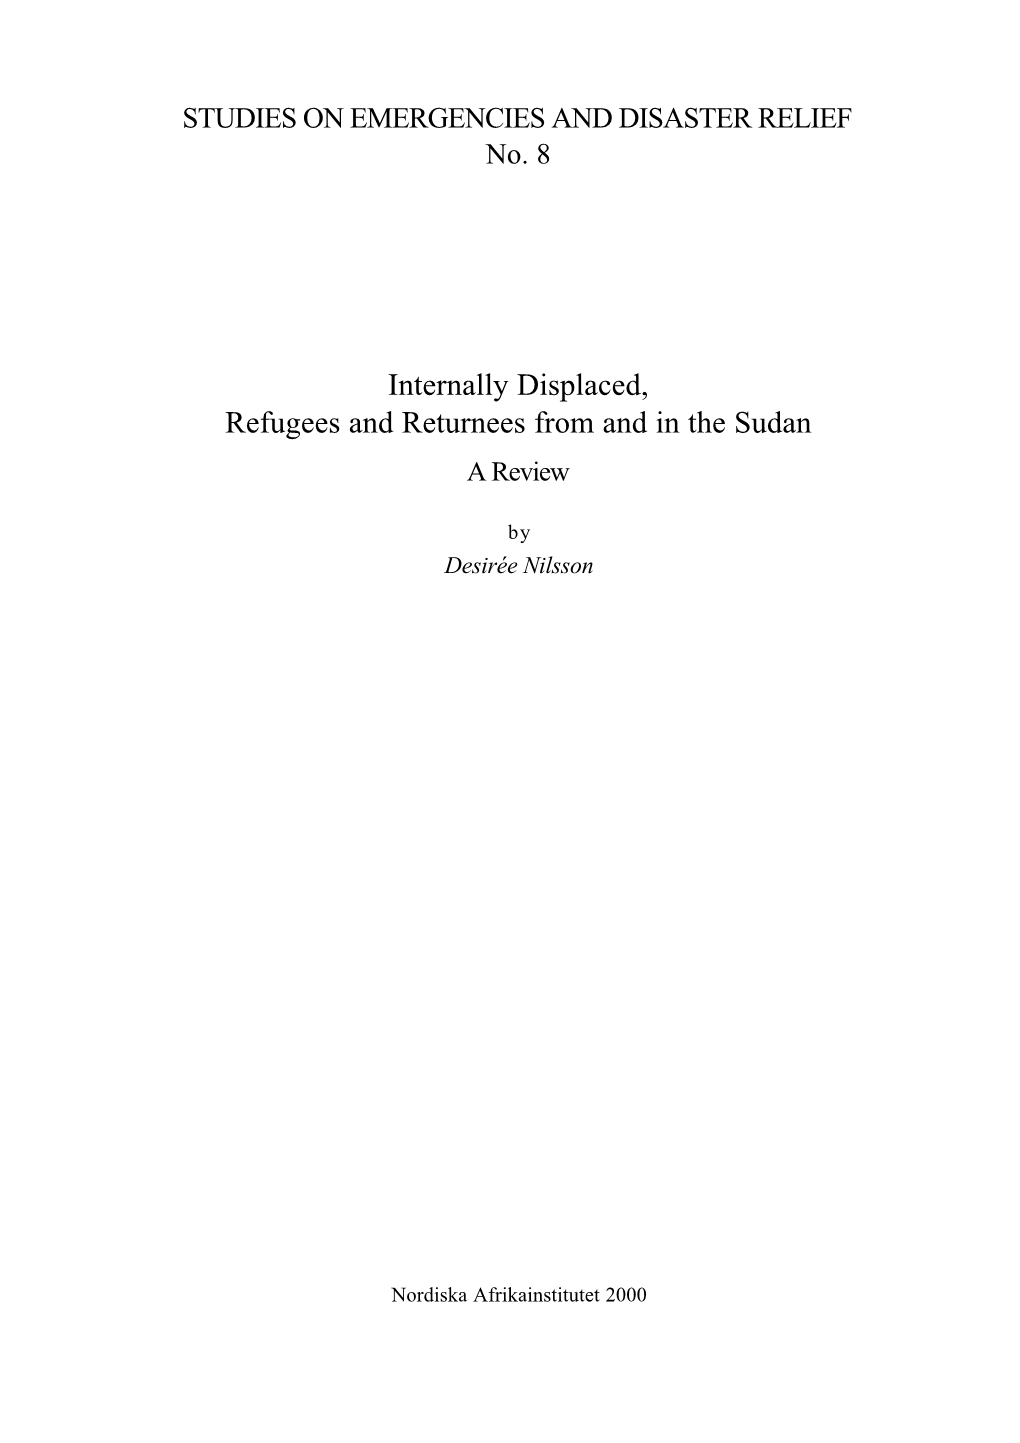 Internally Displaced, Refugees and Returnees from and in the Sudan a Review